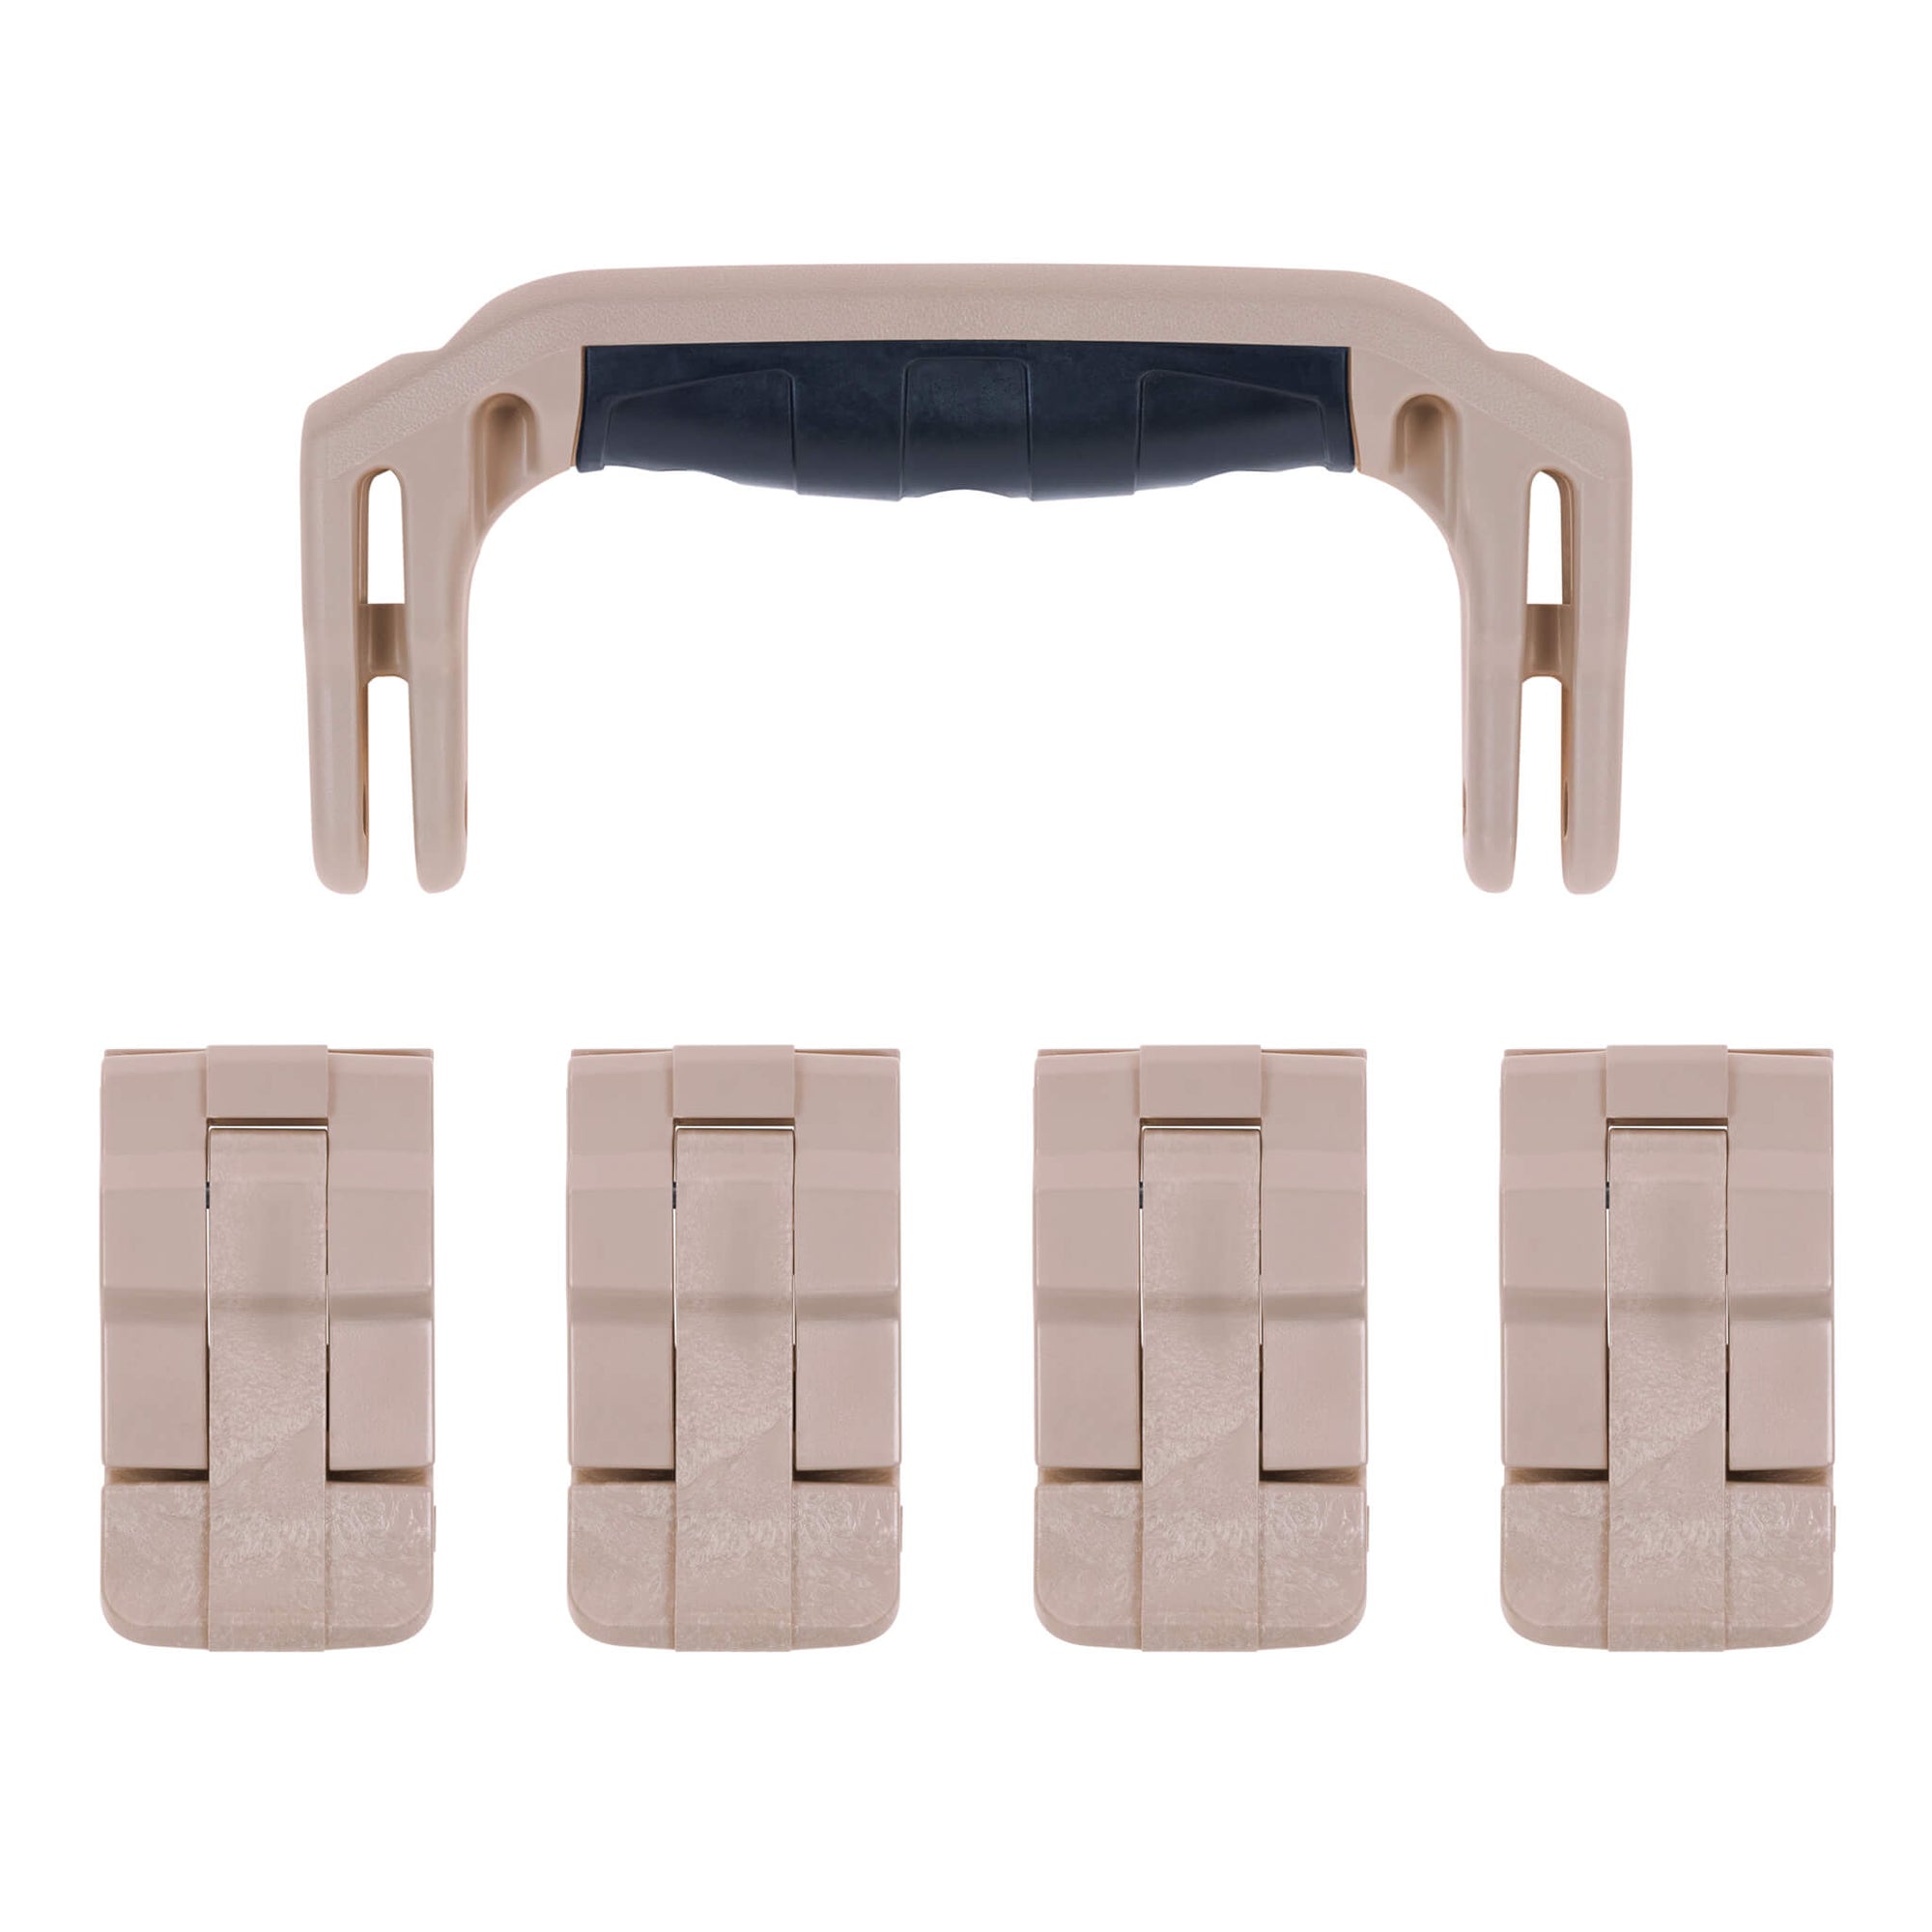 Pelican 1495 Replacement Handle & Latches, Desert Tan (Set of 1 Handle, 4 Latches) ColorCase 